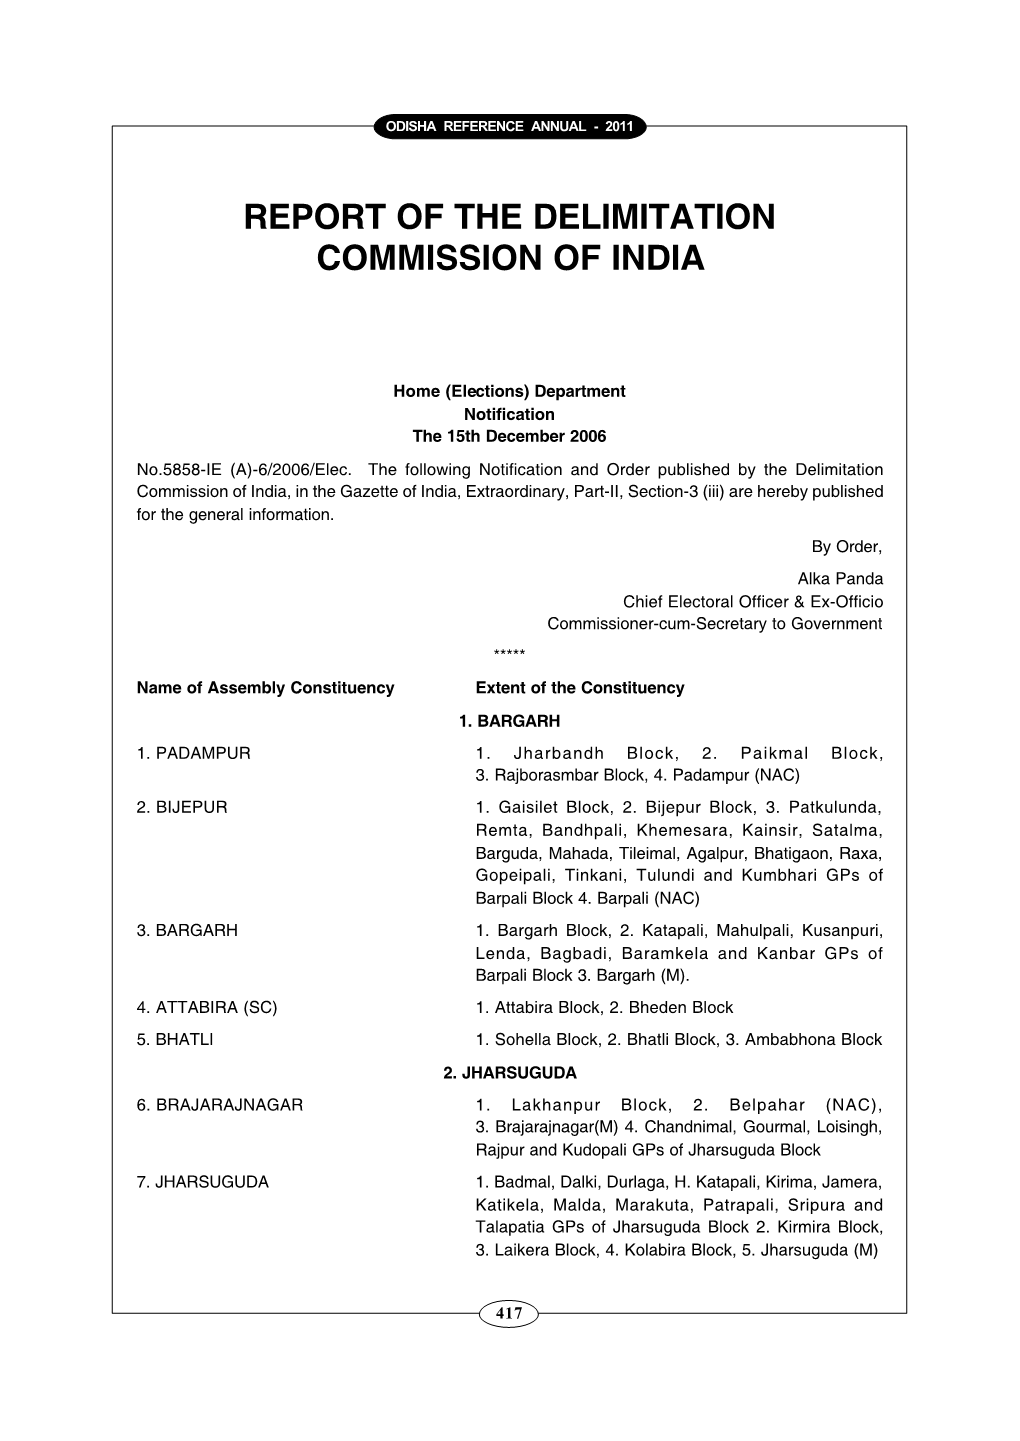 Report of the Delimitation Commission of India